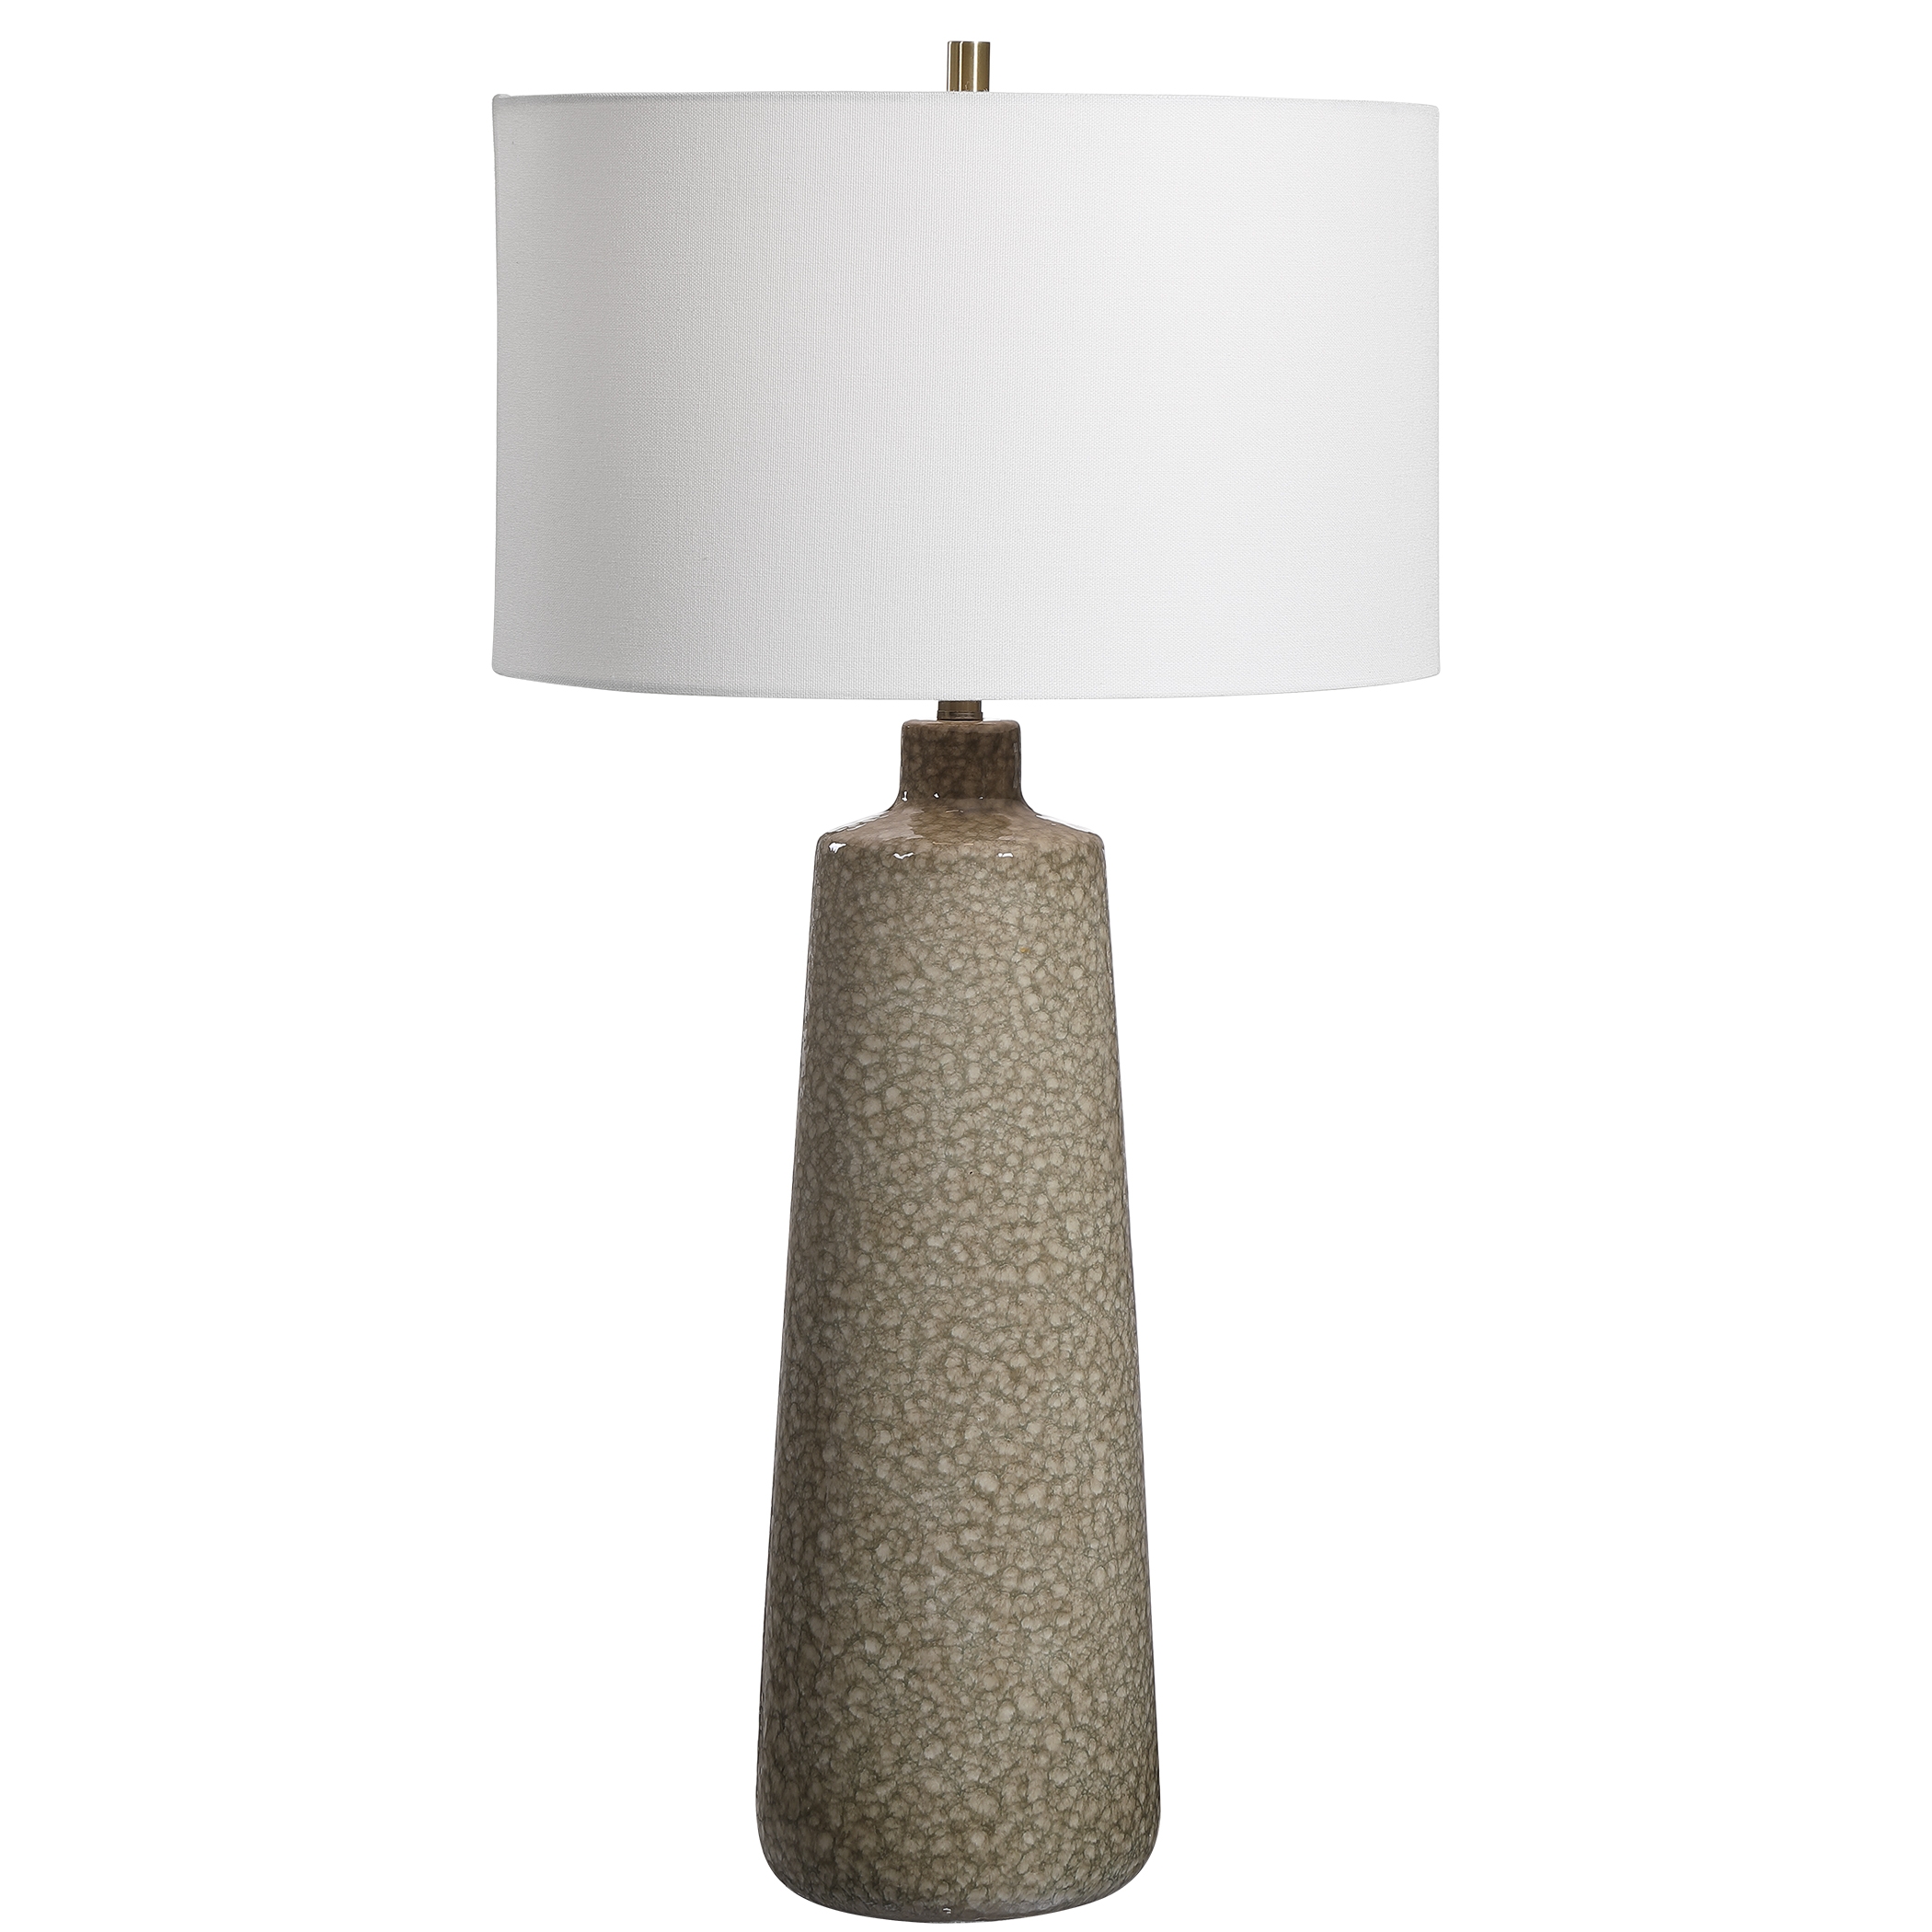 Linnie Sage Green Table Lamp - Image 2